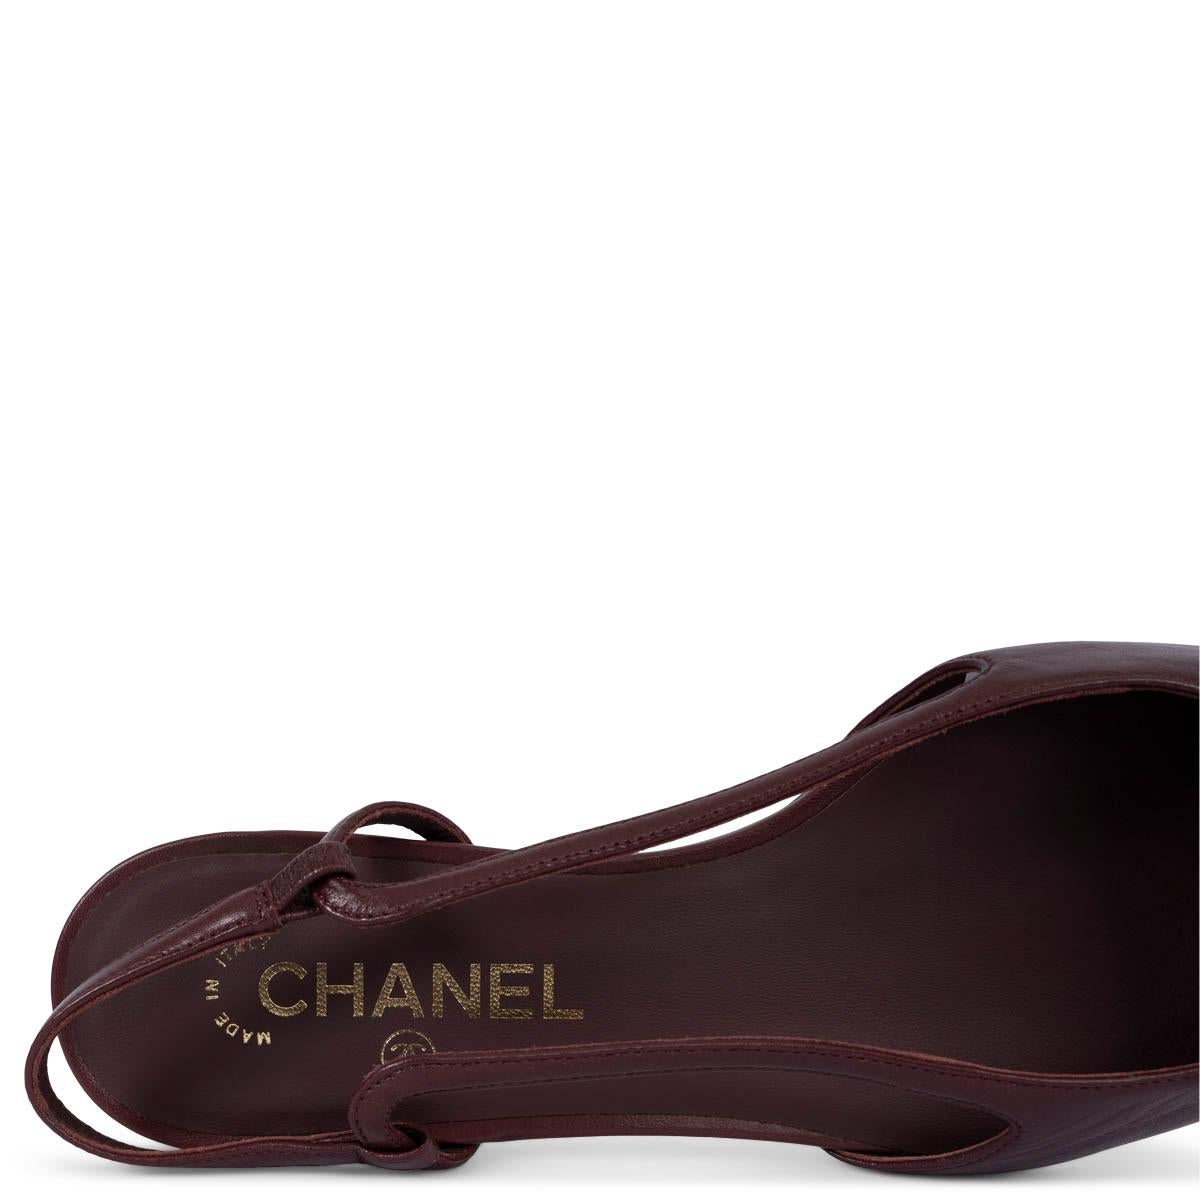 CHANEL burgundy leather G35261 SLINGBACK Flats Shoes 39 fit 38.5 3